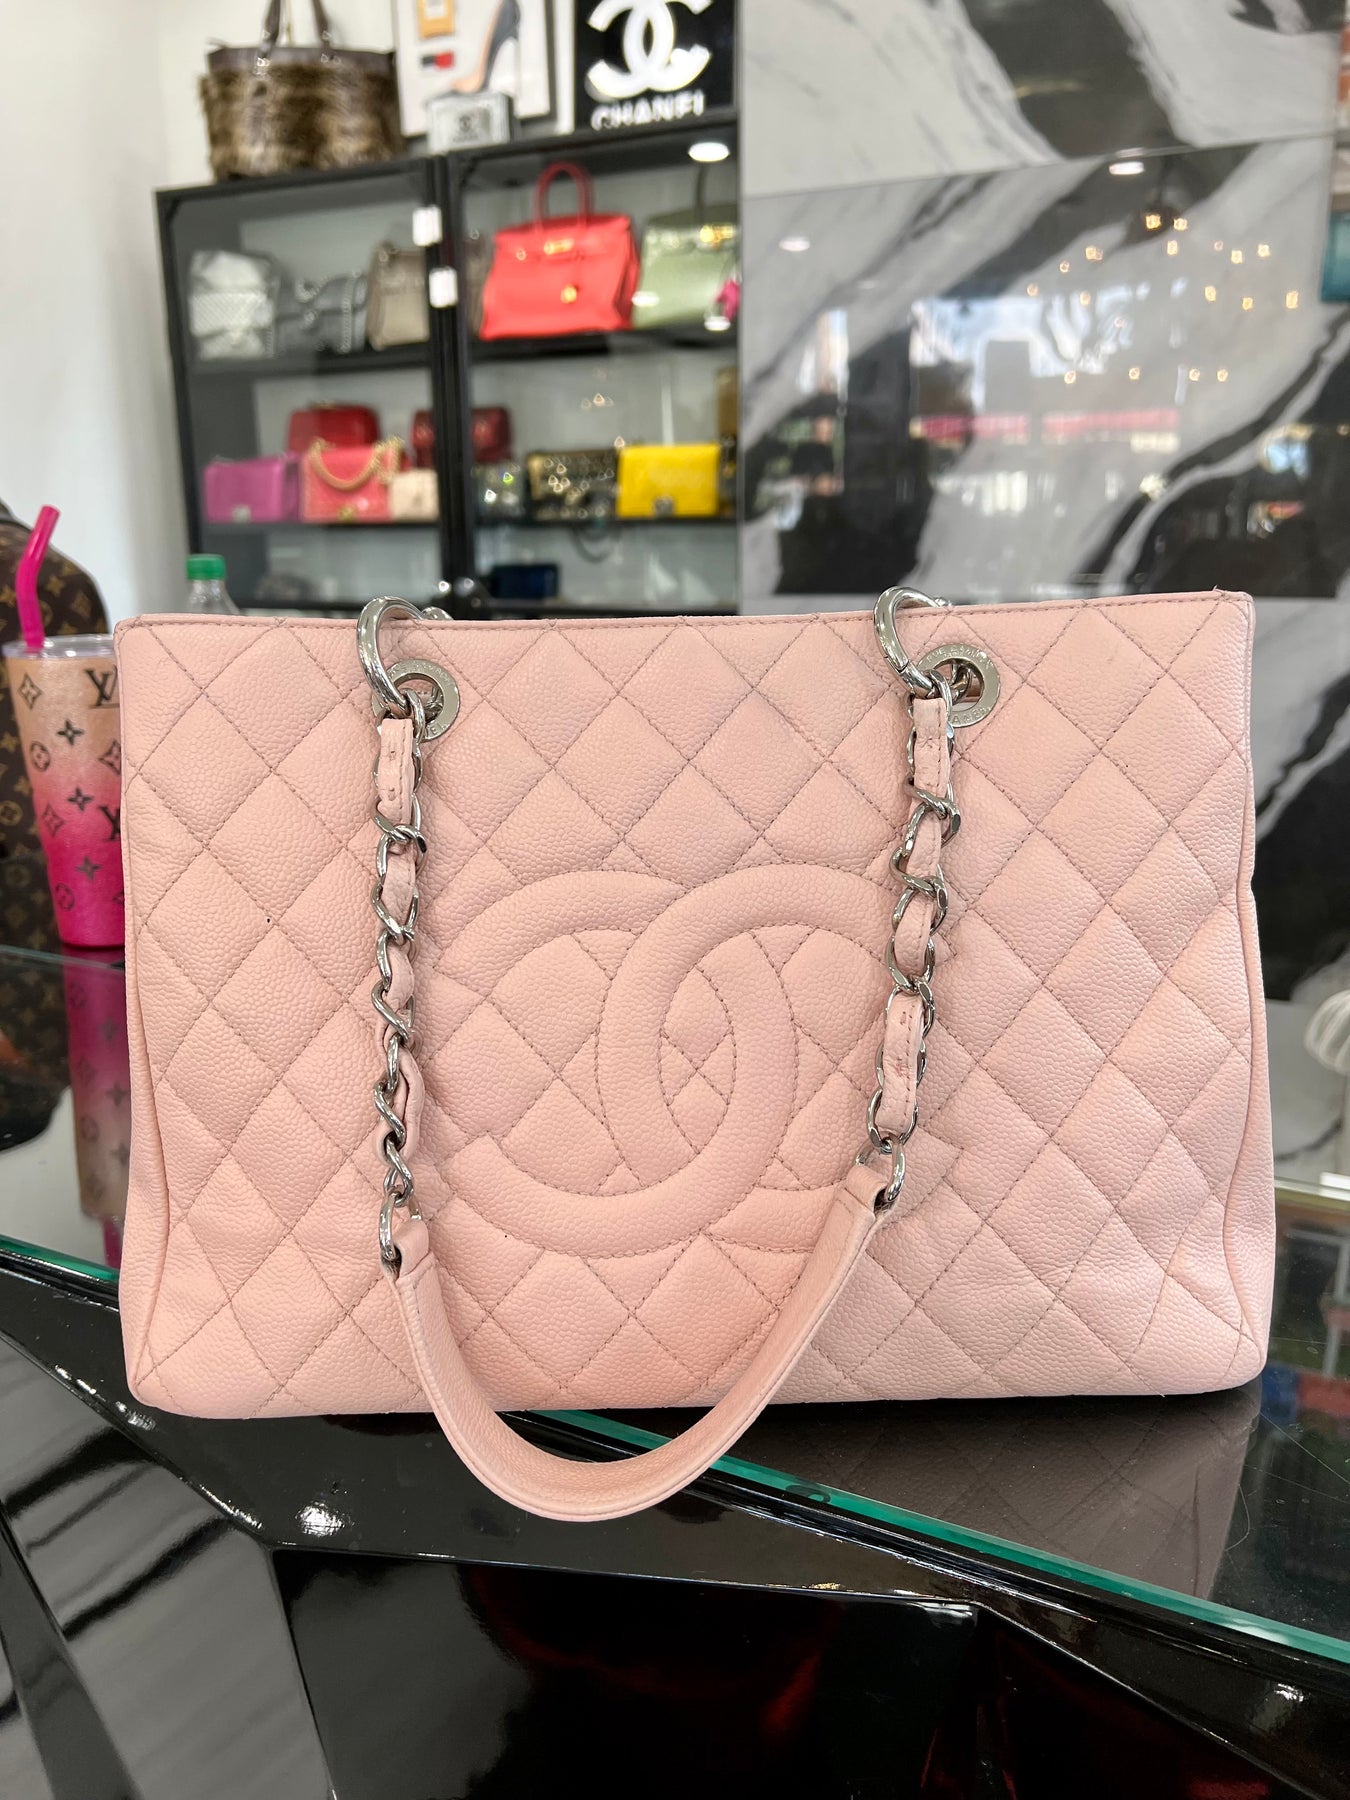 CHANEL Caviar Grand Shopping Tote GST Pink 18416